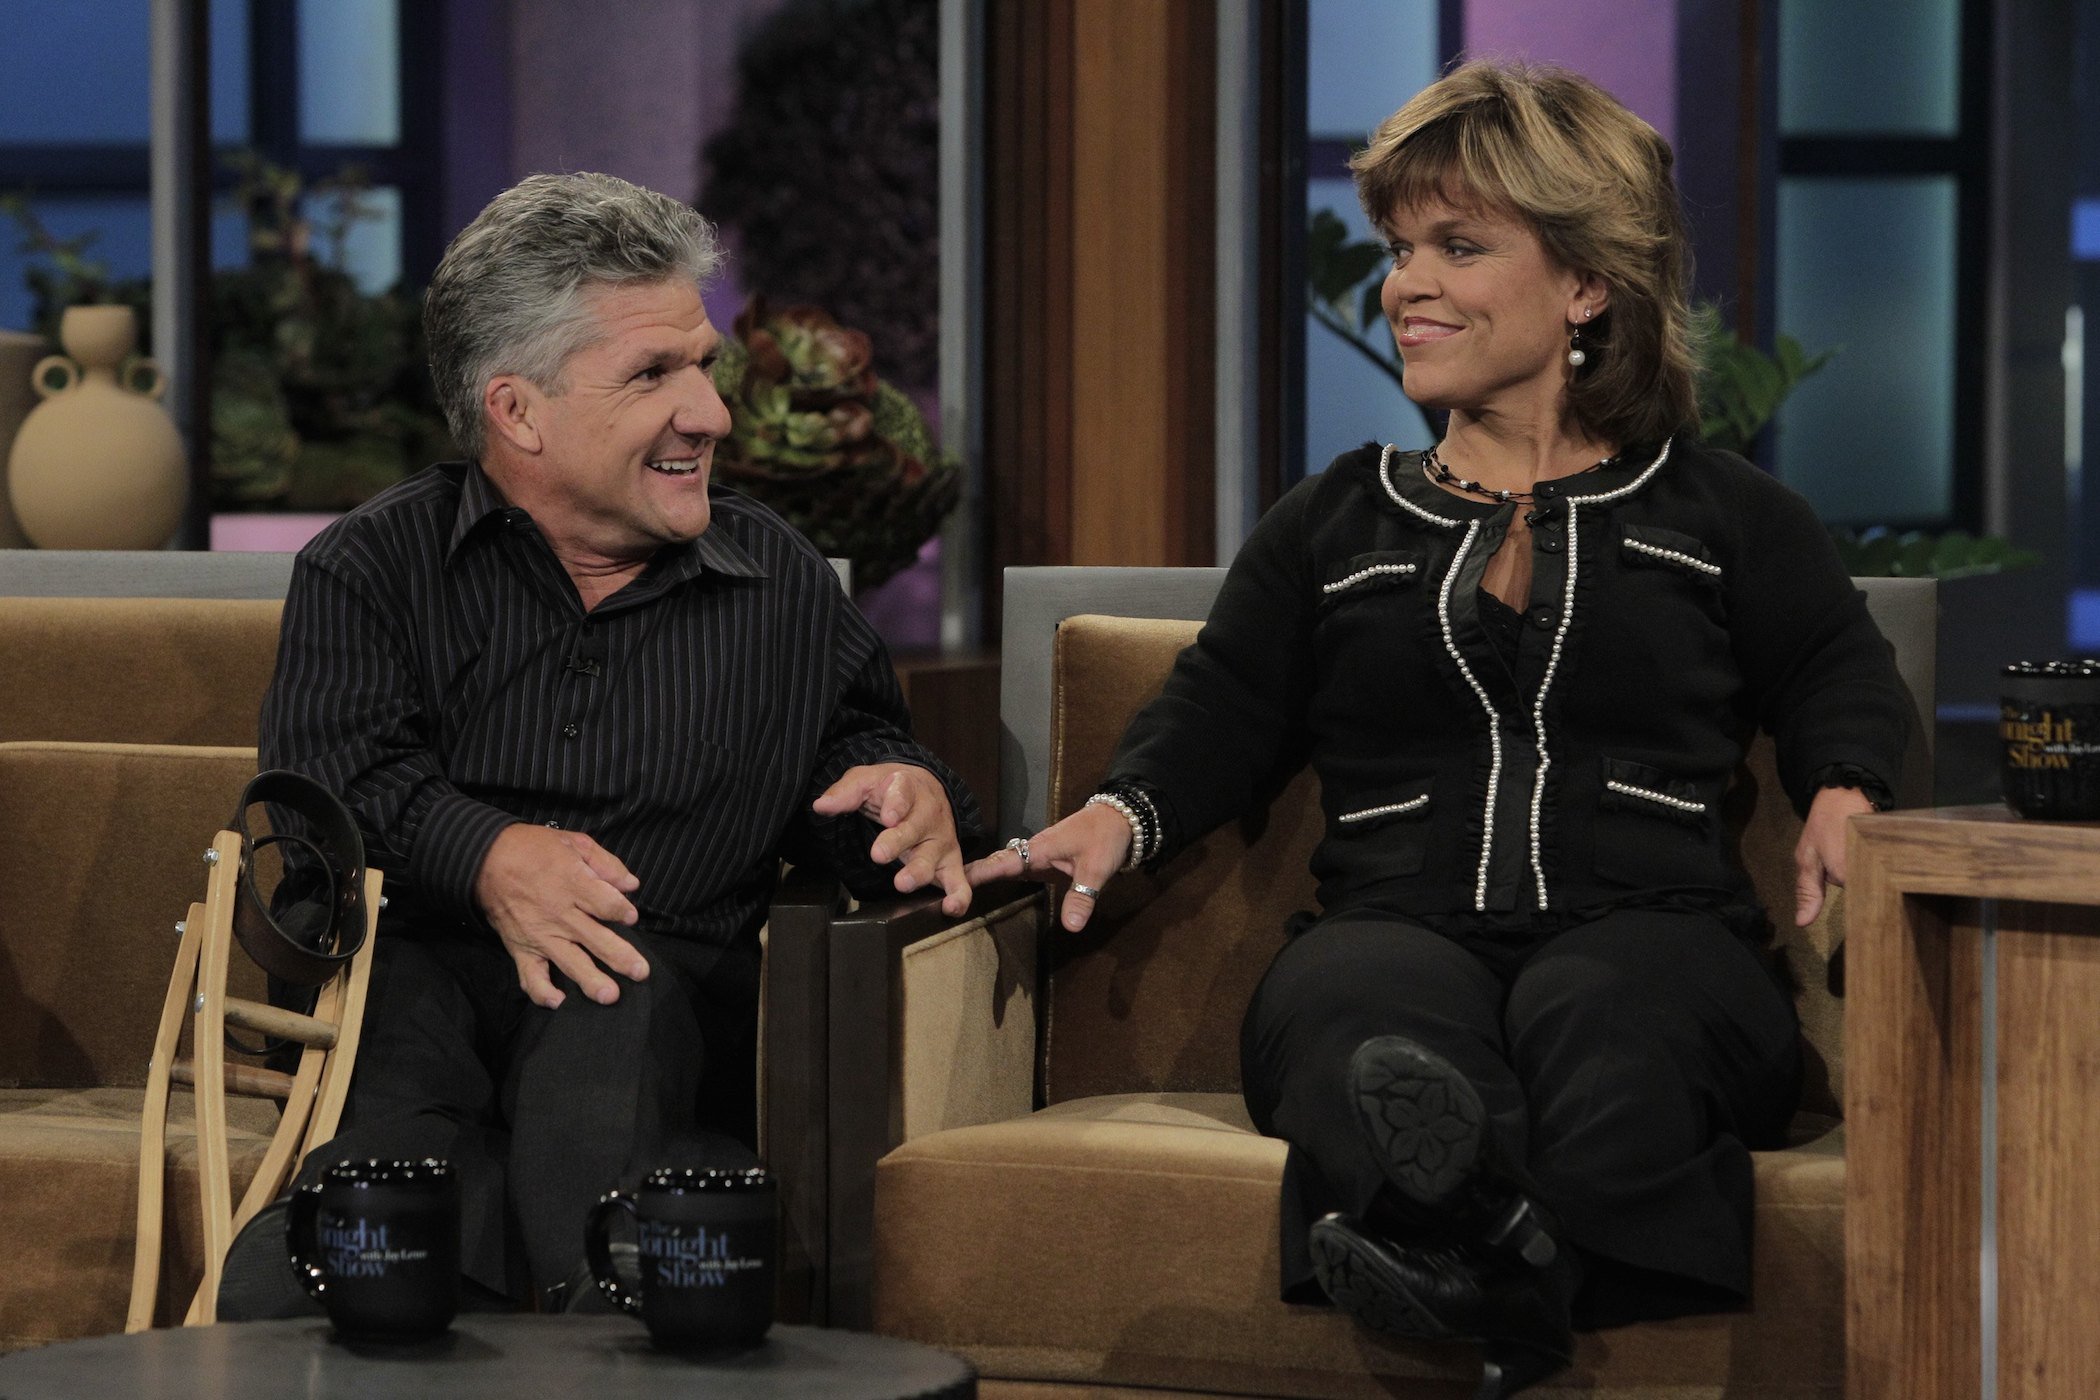 Matt and Amy Roloff from 'Little People, Big World' sitting next to each other during an interview